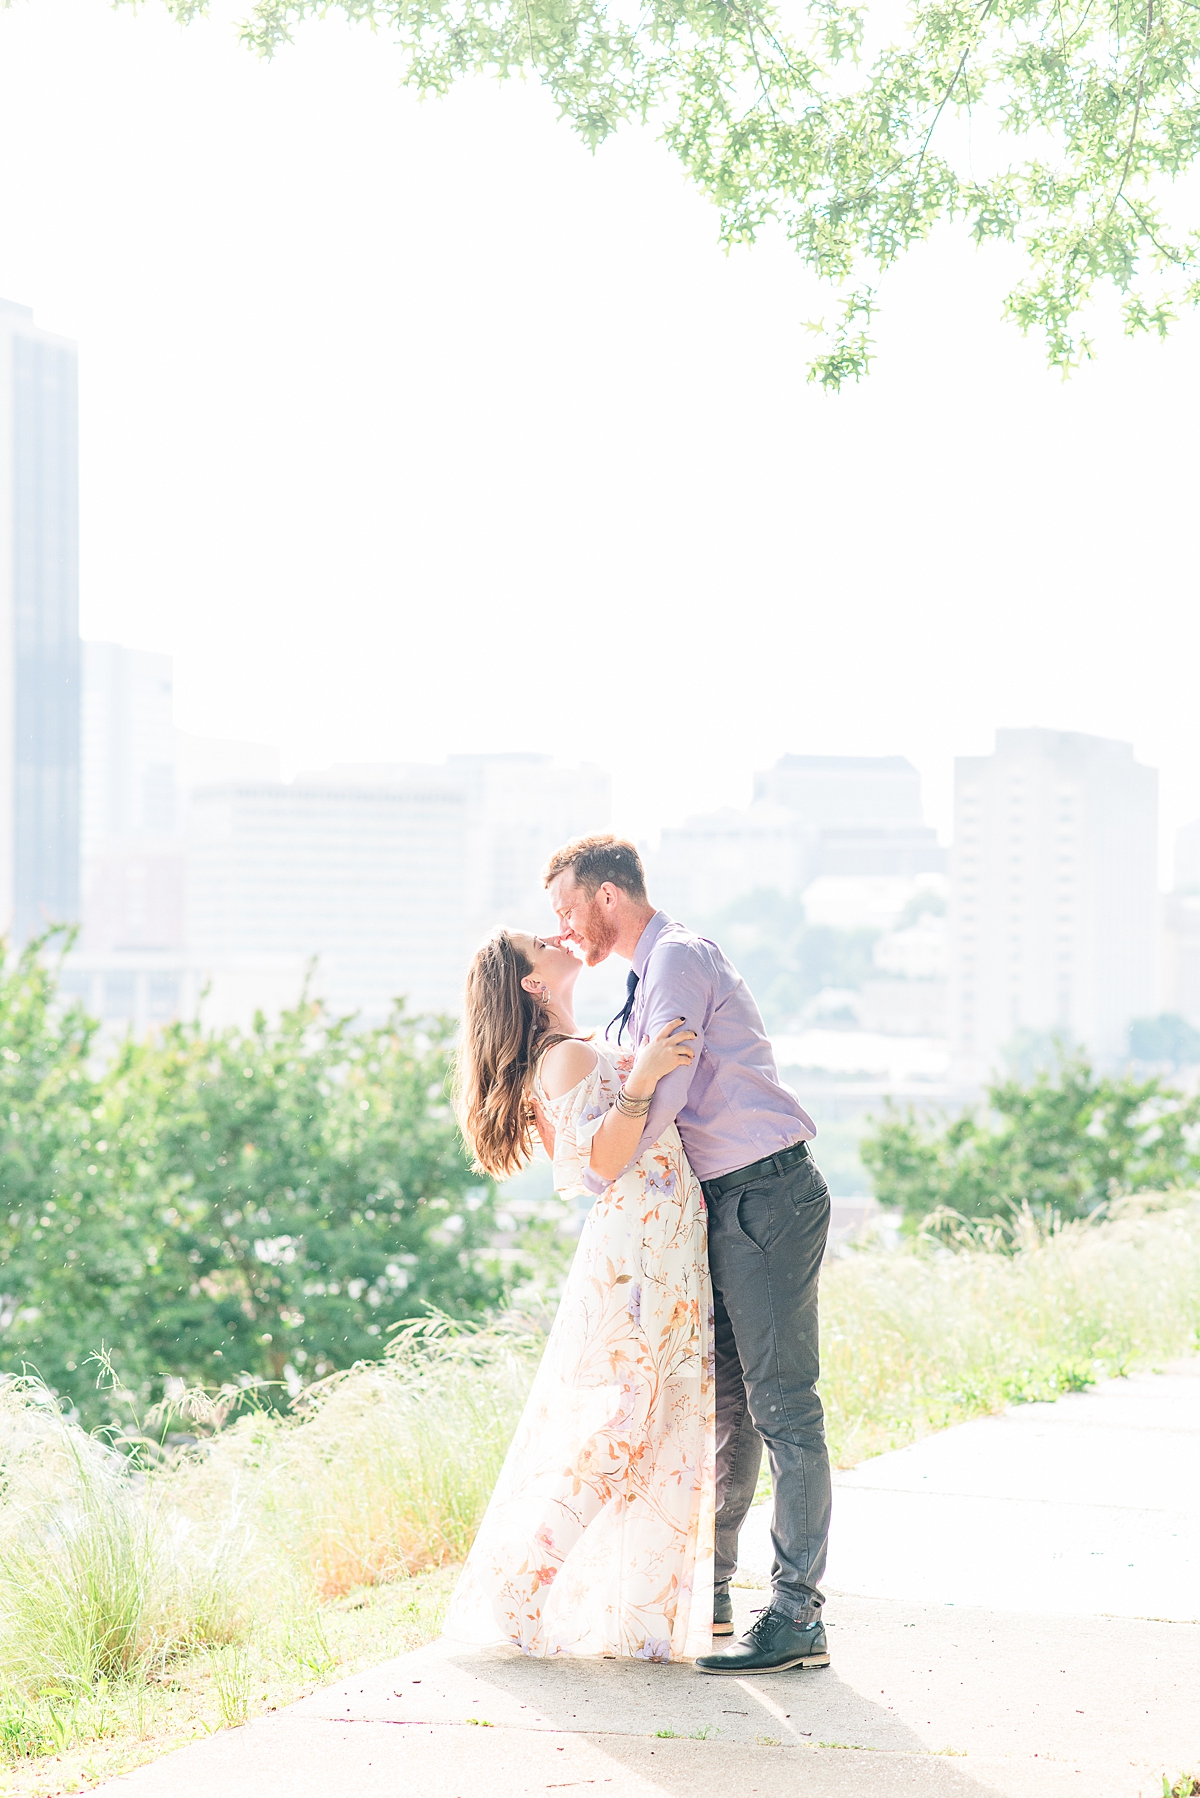 City Skyline View During Jefferson Park Engagement Session in Downtown Richmond. Photography by Charlottesville Wedding Photographer Kailey Brianne Photography. 